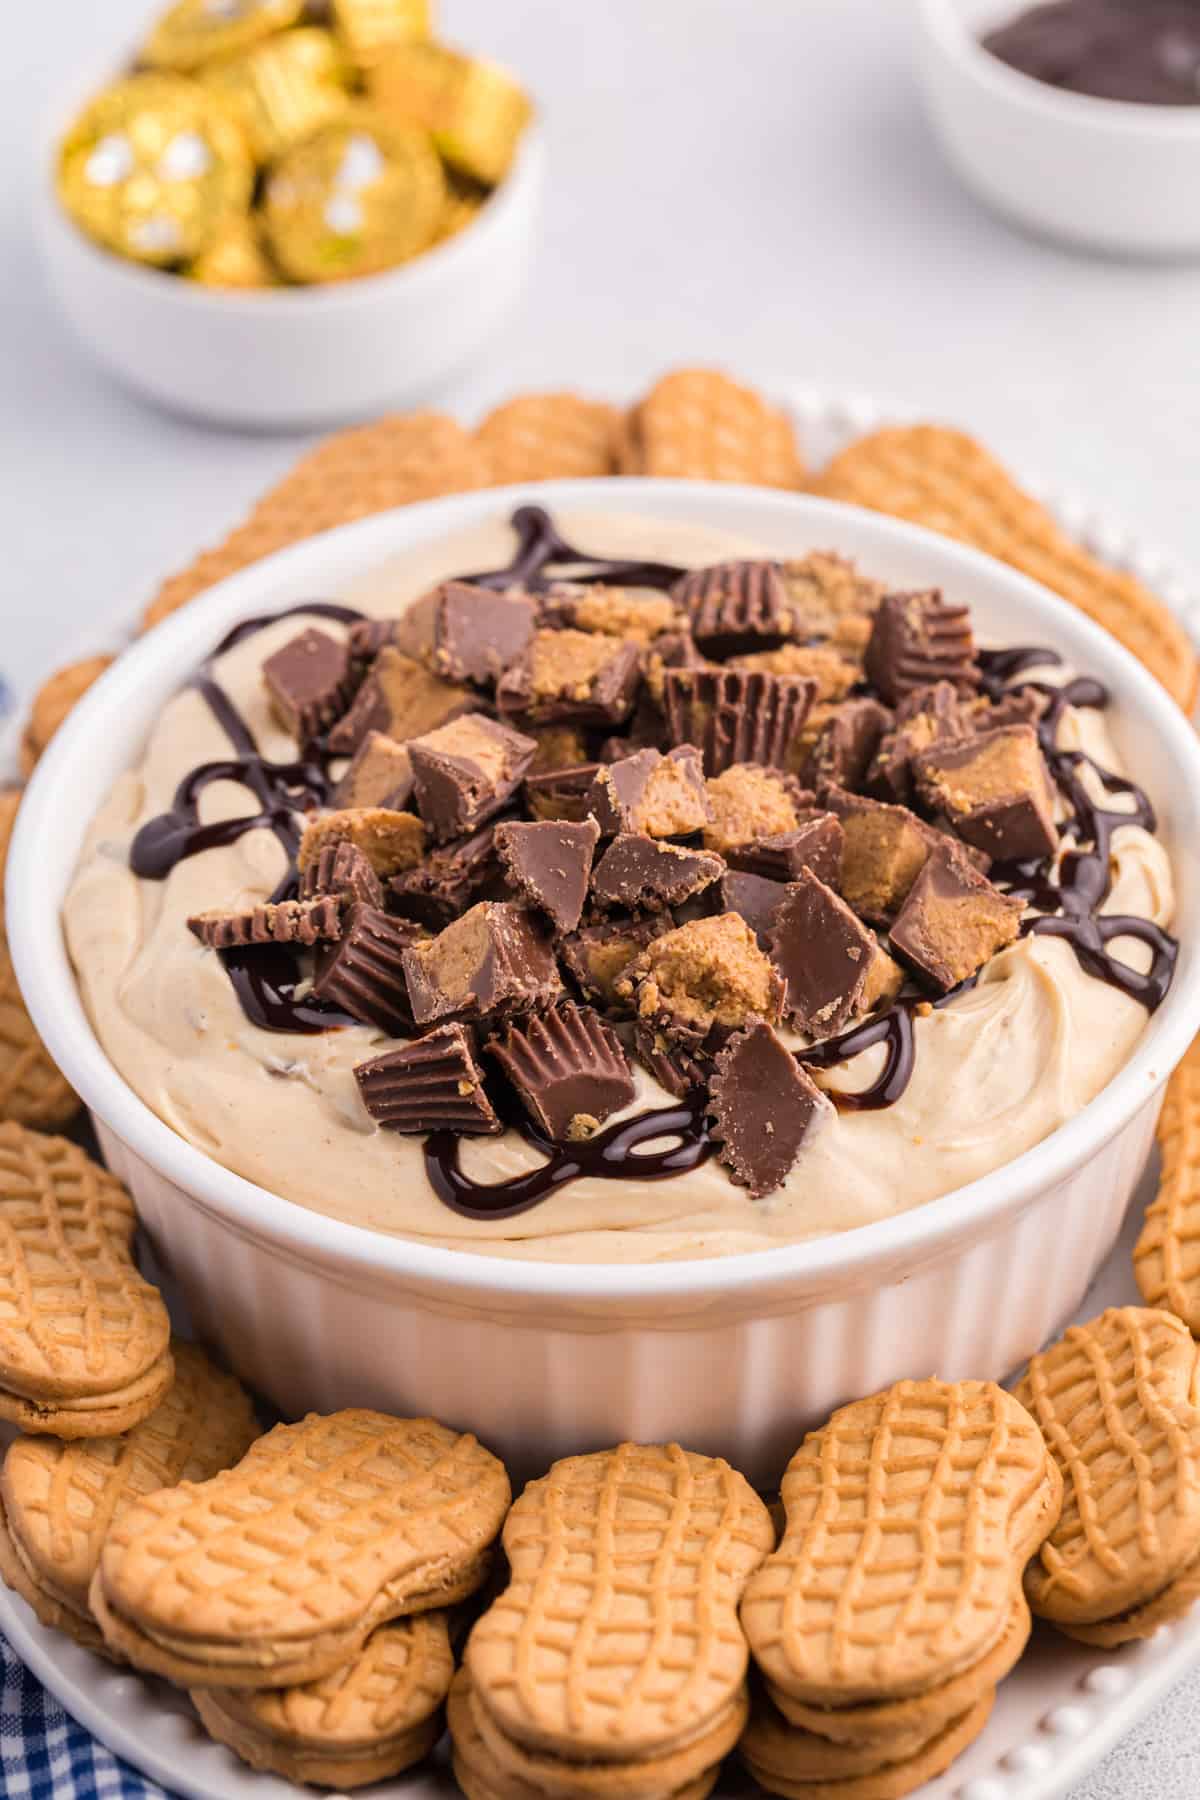 Reese's Peanut Butter Cup Dip in white serving bowl served on a platter with Nutter Butter Cookies for dipping.